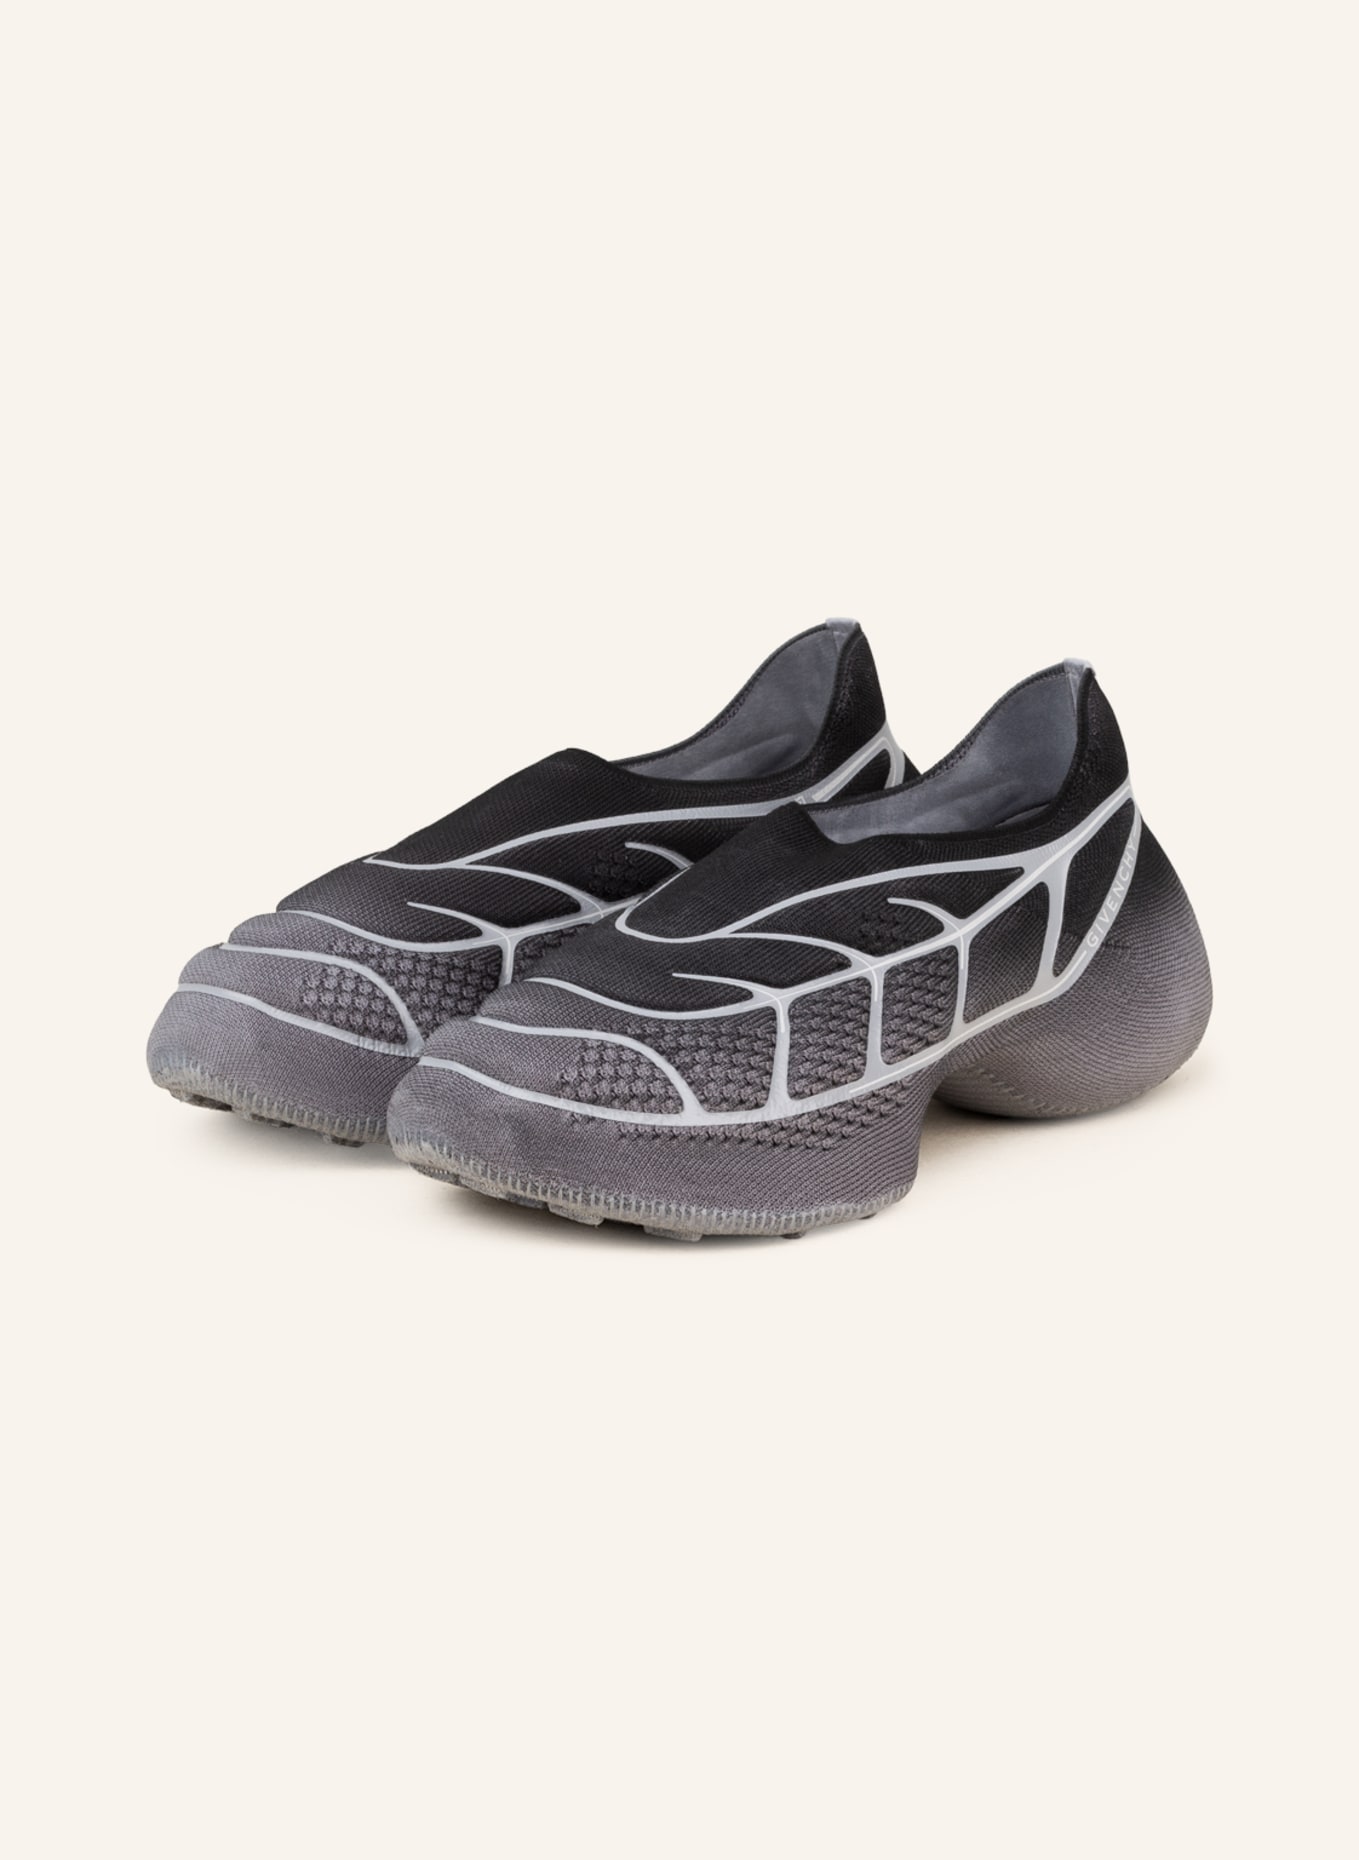 GIVENCHY Sneakers TK-360 PLUS, Color: DARK GRAY/ LIGHT GRAY/ GRAY (Image 1)